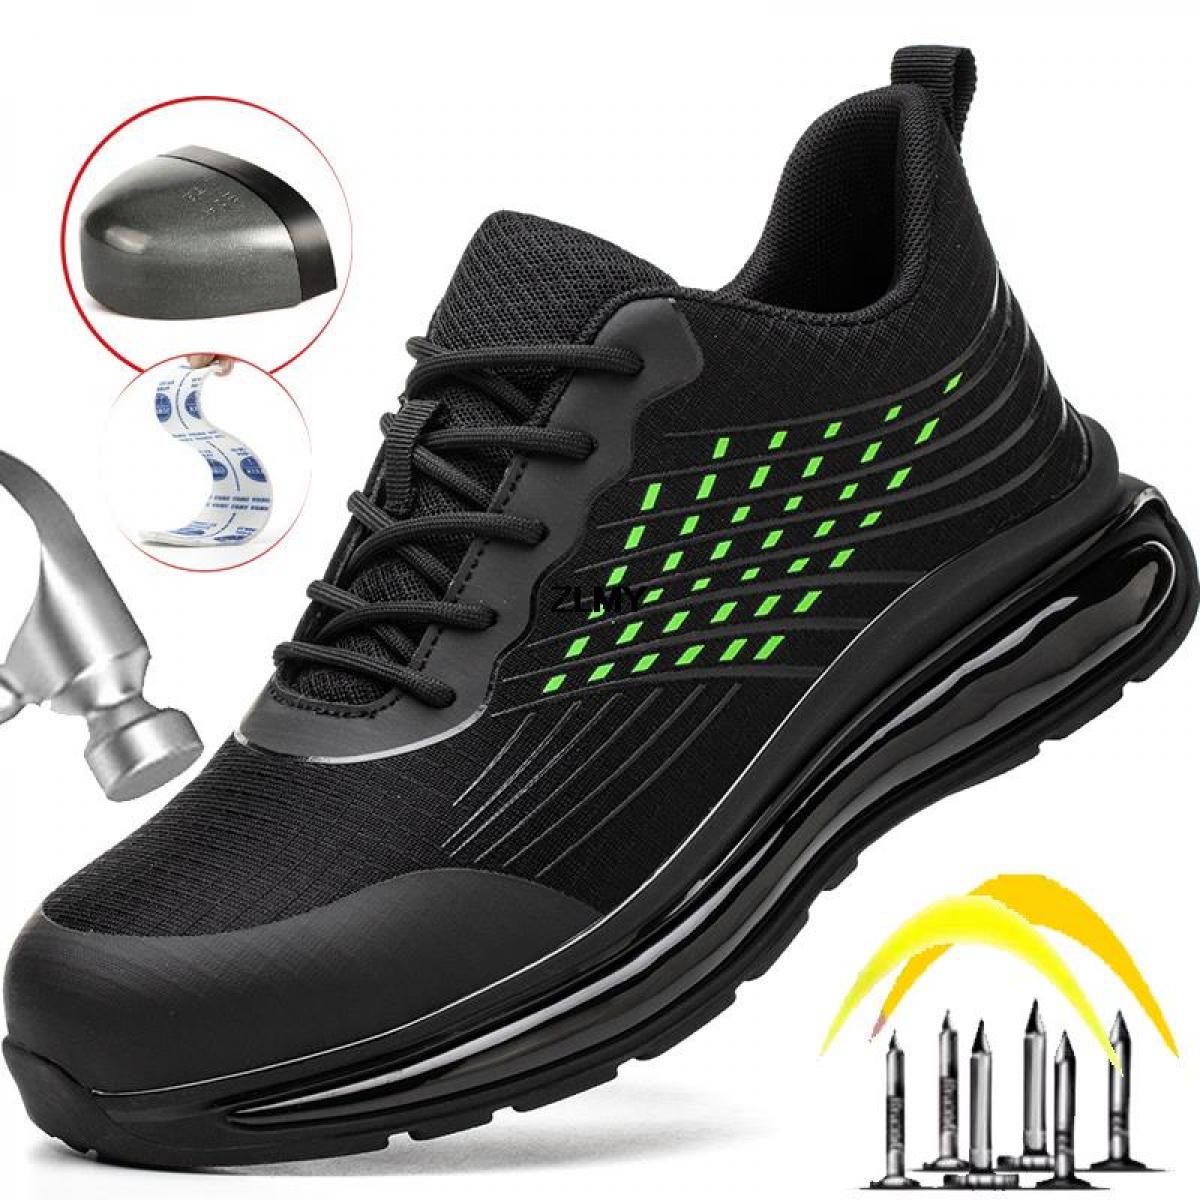 New Air Cushion Safety Shoes Men Steel Toe Sneaker Puncture Proof Work Safety Boots Man Fashion Protective Work Shoes Pl